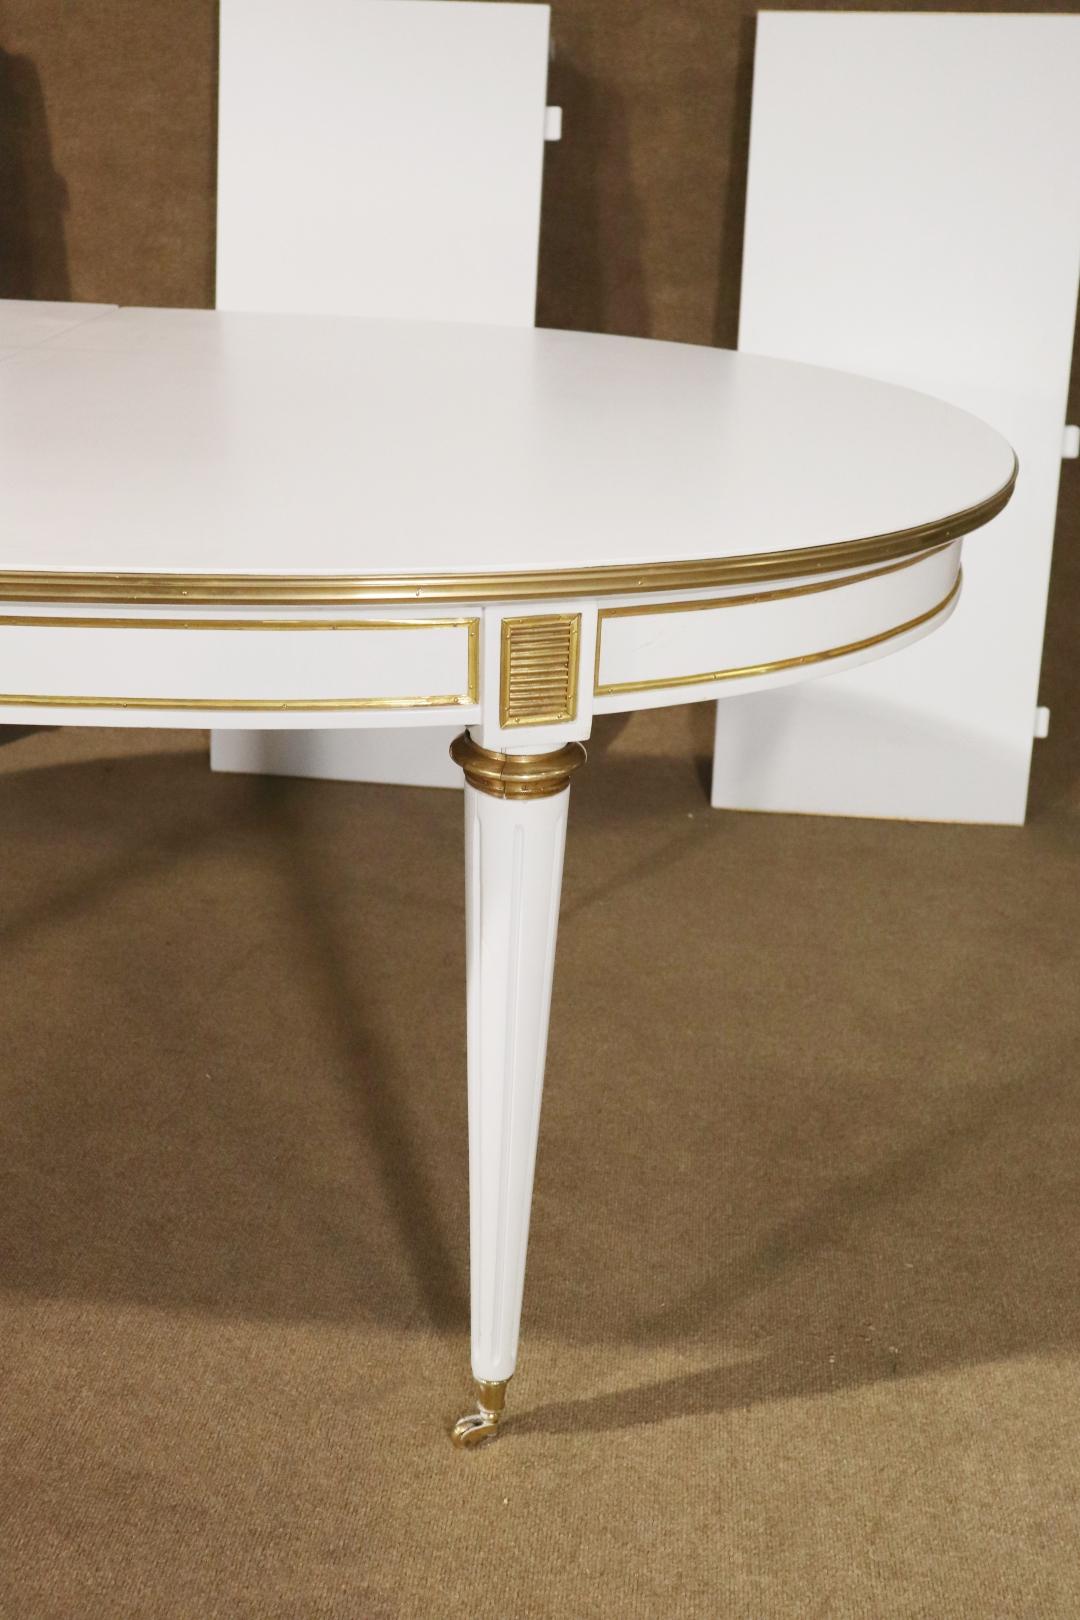 French Manner of Maison Jansen White Lacquer Bronze Mounted Dining Table 3 Leaves  For Sale